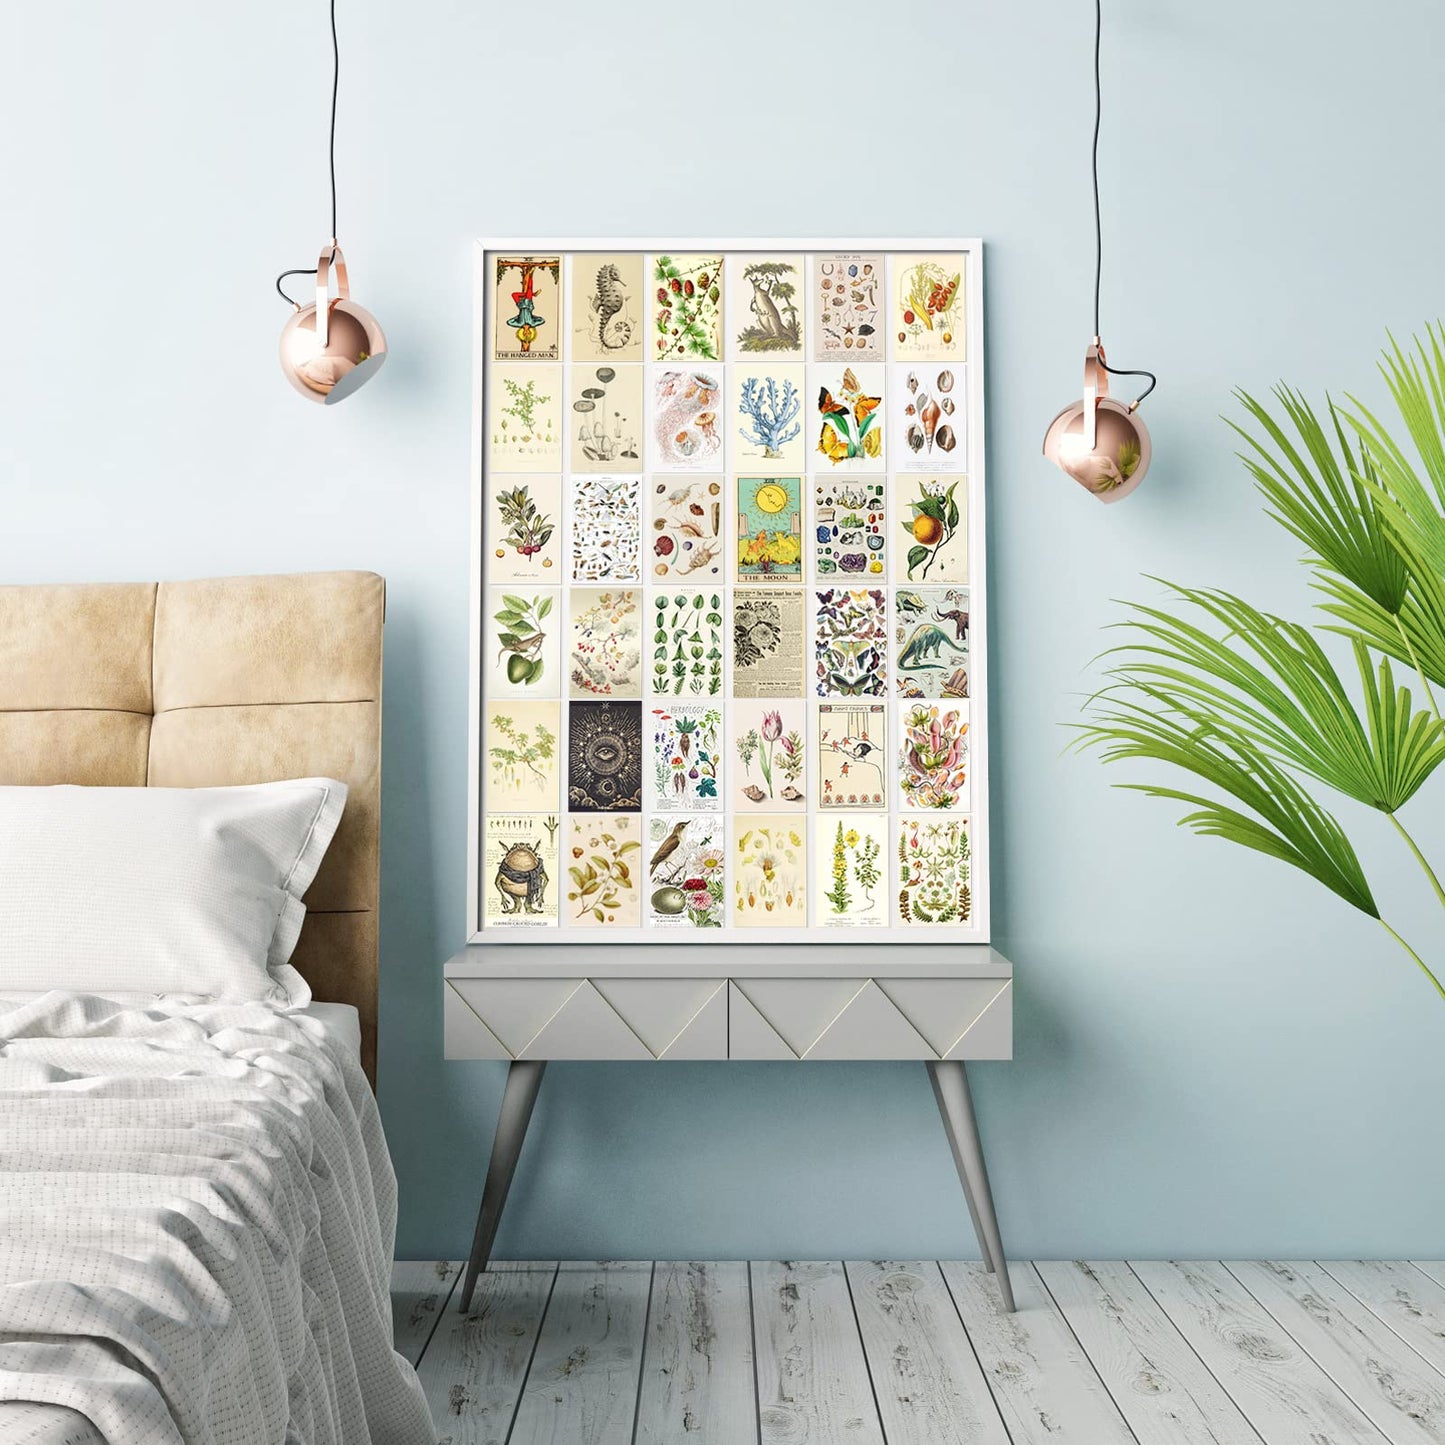 Vintage Botanical Room Decor Aesthetic Pictures Wall Collage Kit, Vintage Illustration Tarot Posters for Room Aesthetic, Cottagecore Wall Decor for Bedroom Dorm Aesthetic, Botanical Wall Art Prints